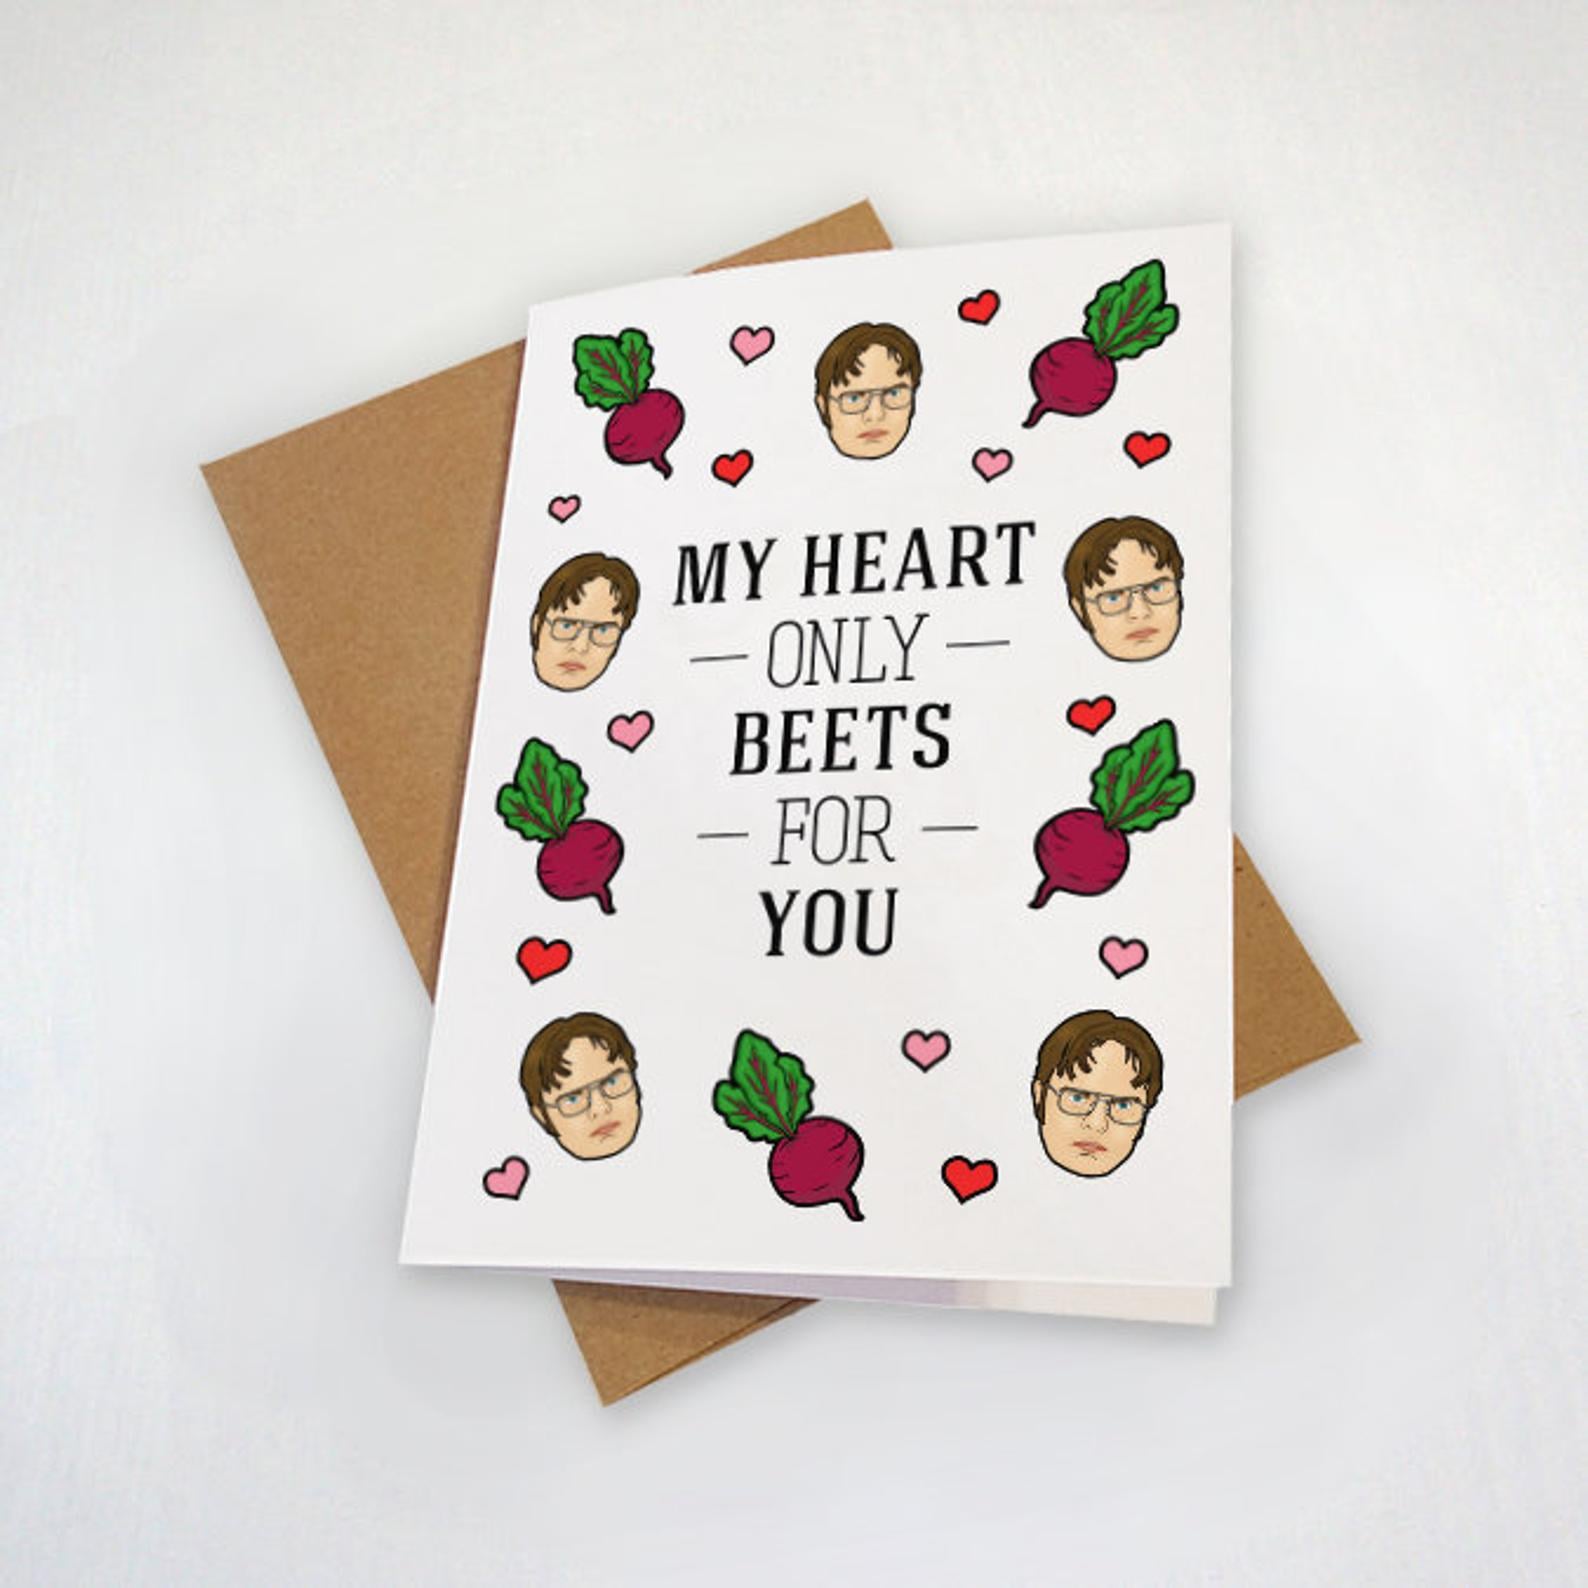 The 11 Best Places to Buy Valentine's Day Cards in 2022